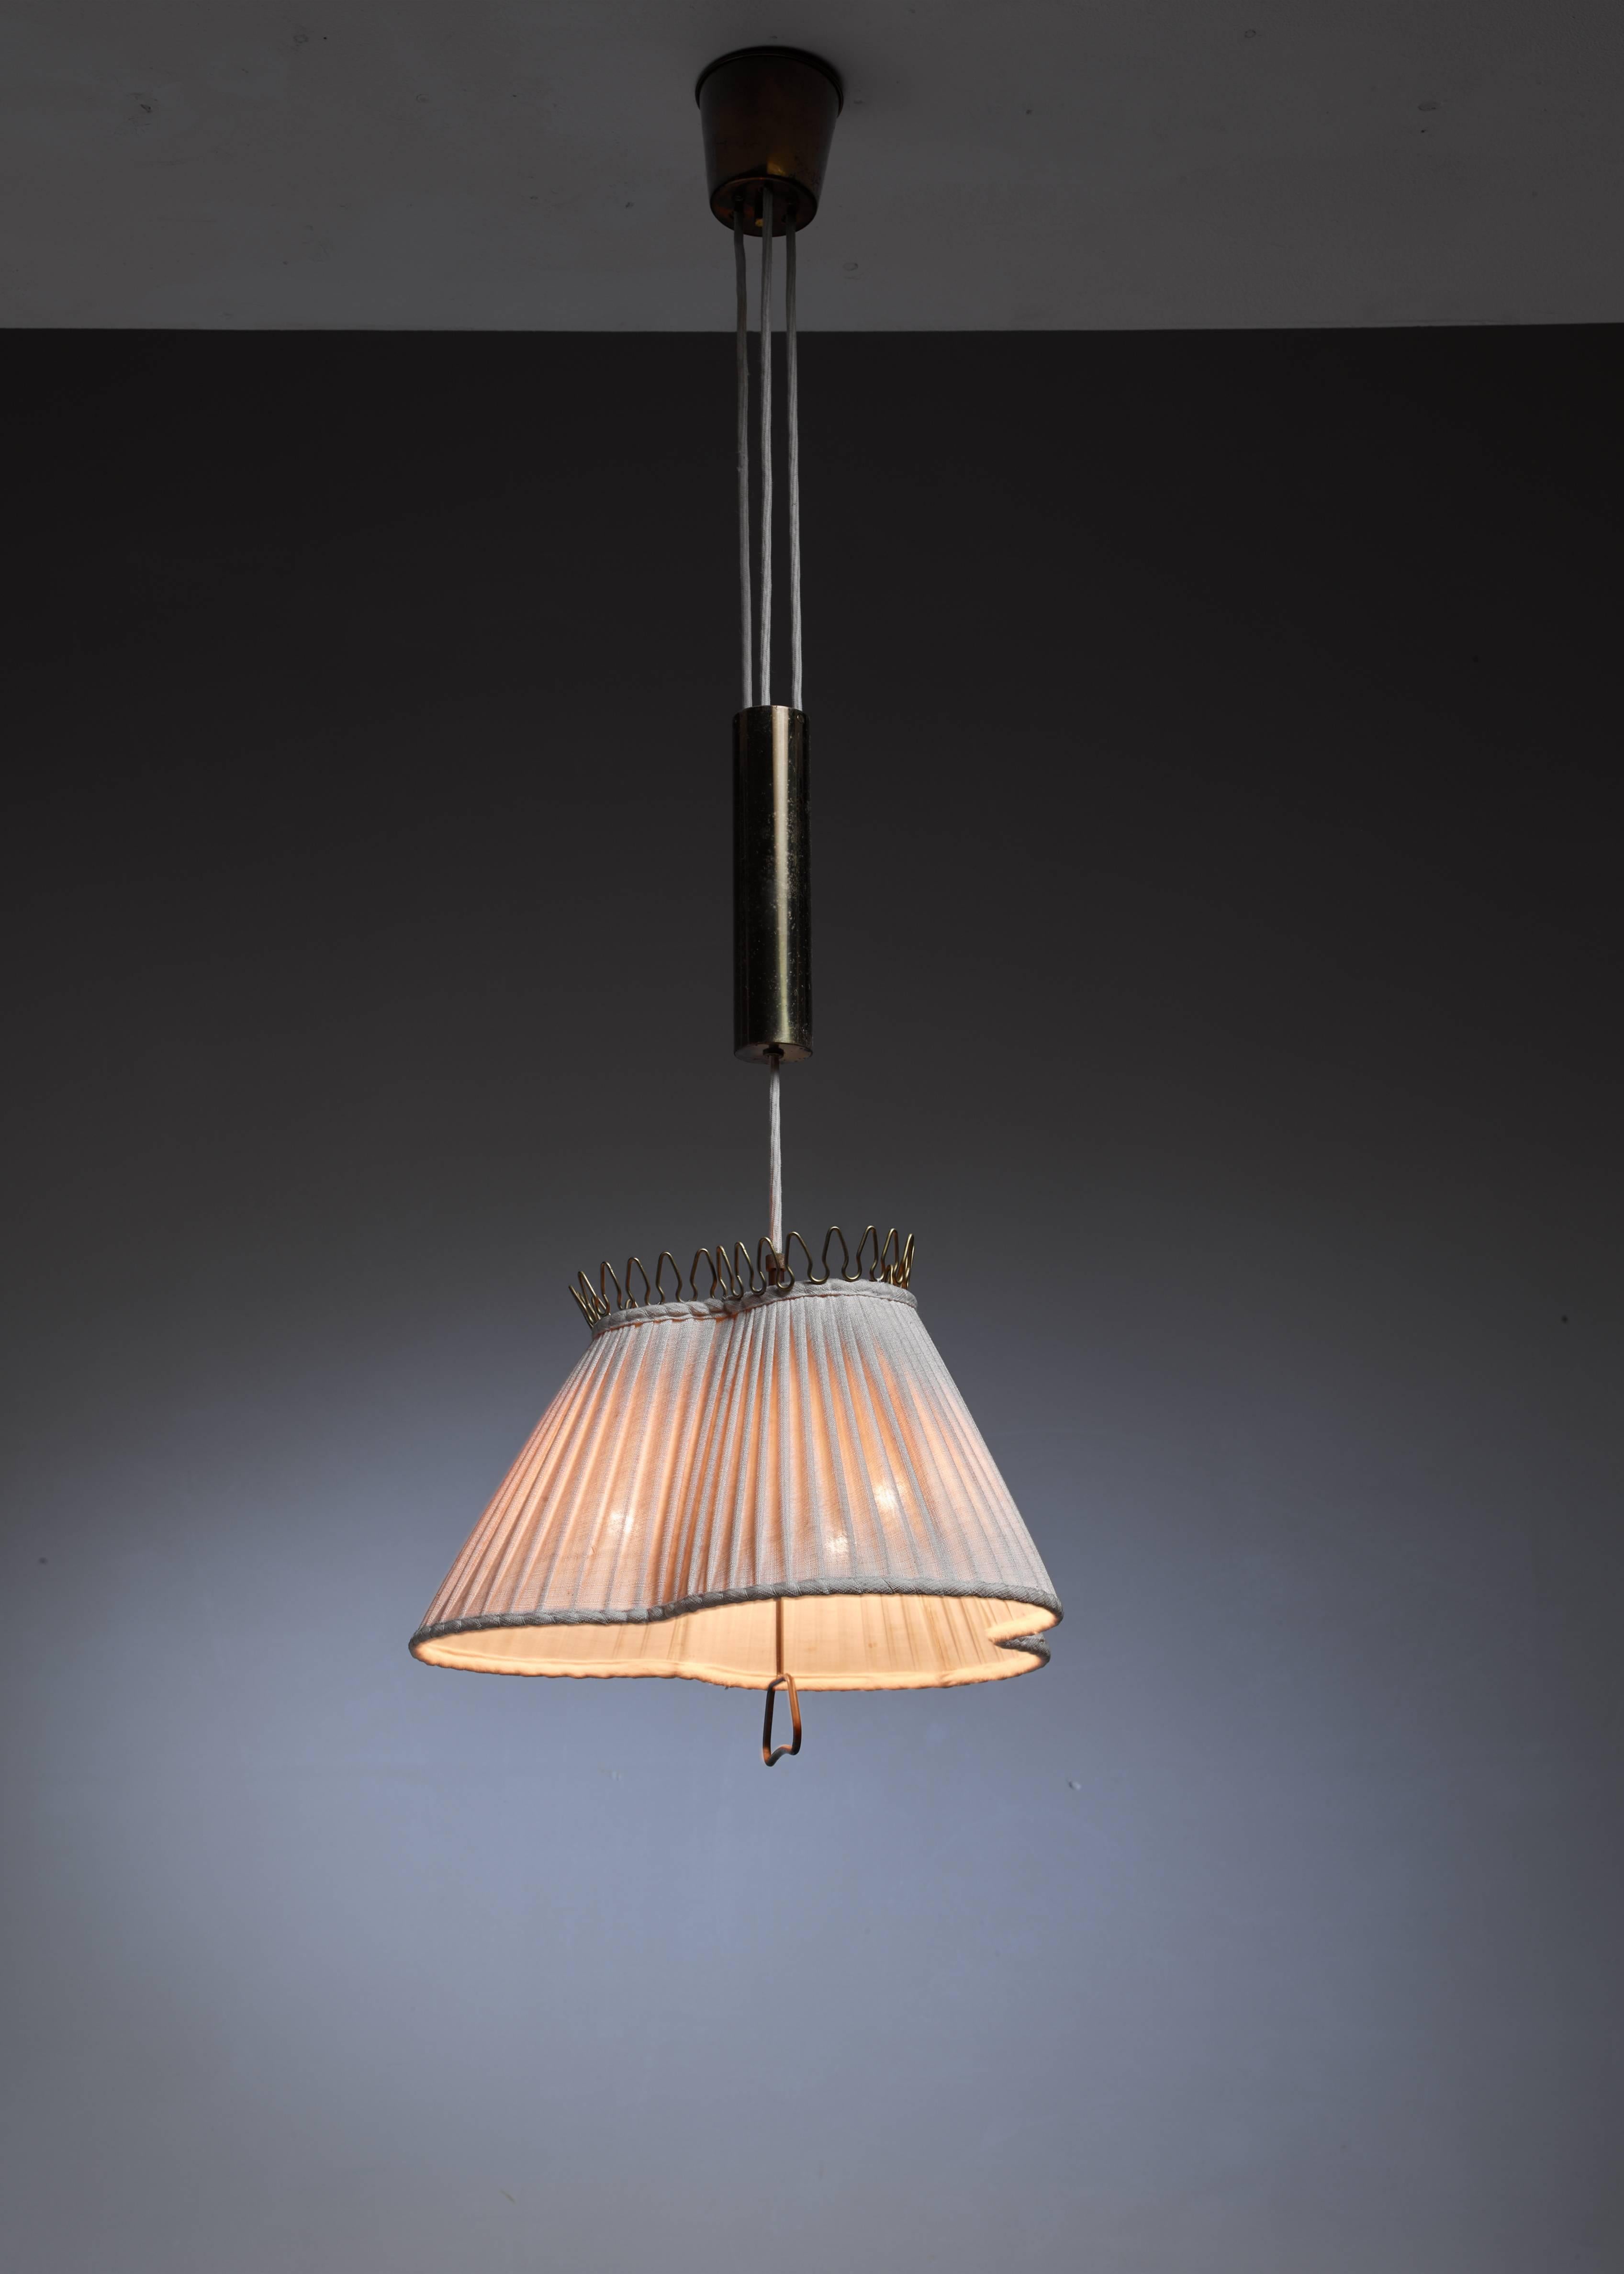 Scandinavian Modern 1940s Pendant Lamp with a Fabric Shade, Counterweight and Brass Pull, Sweden